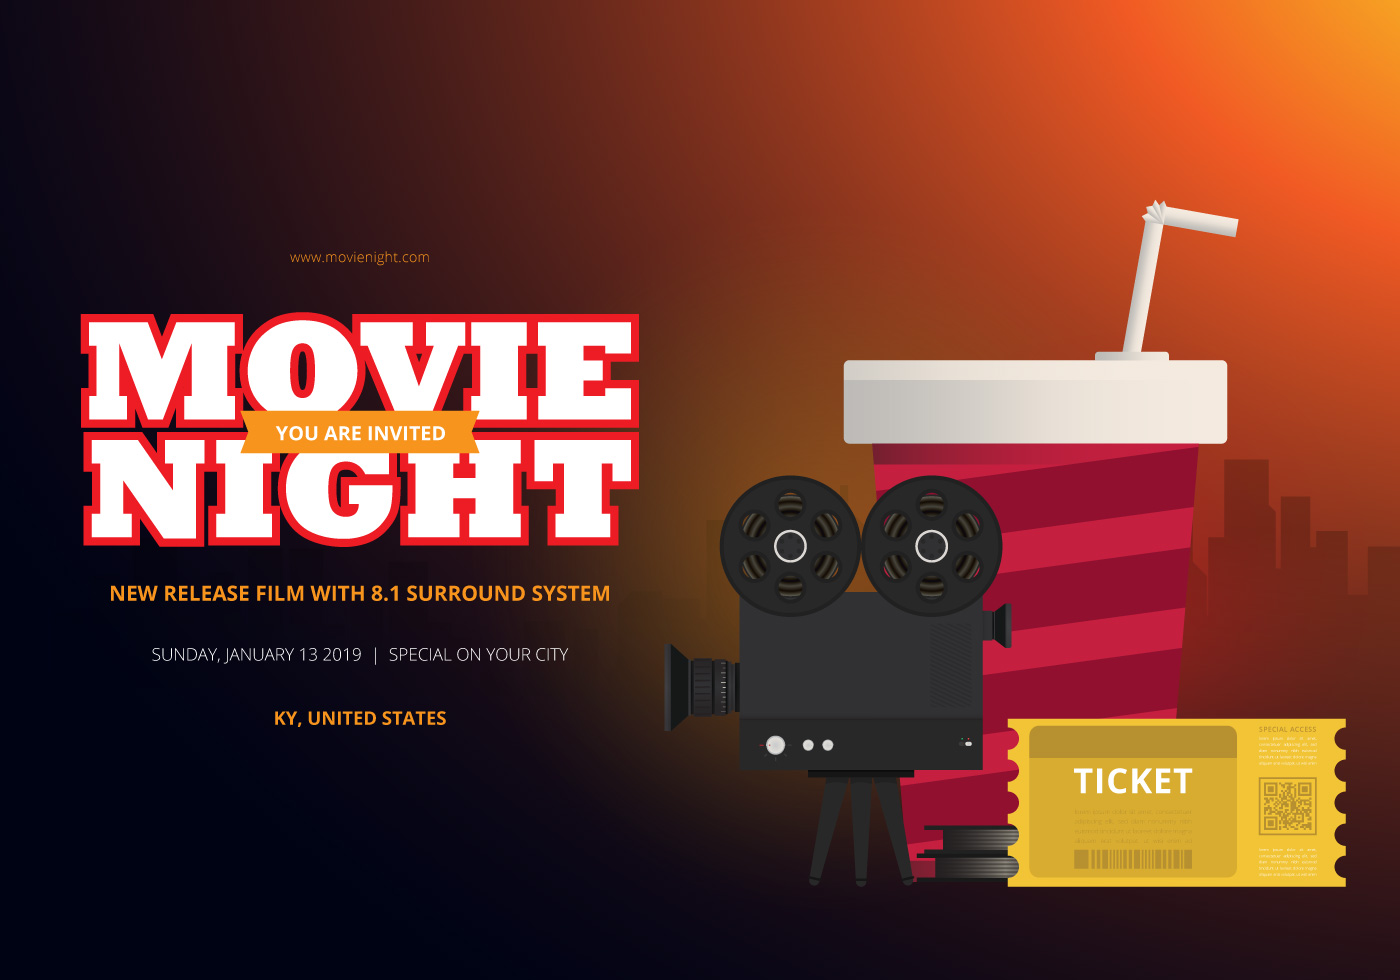 Download Movie Night Party Poster or Web Template - Download Free ...